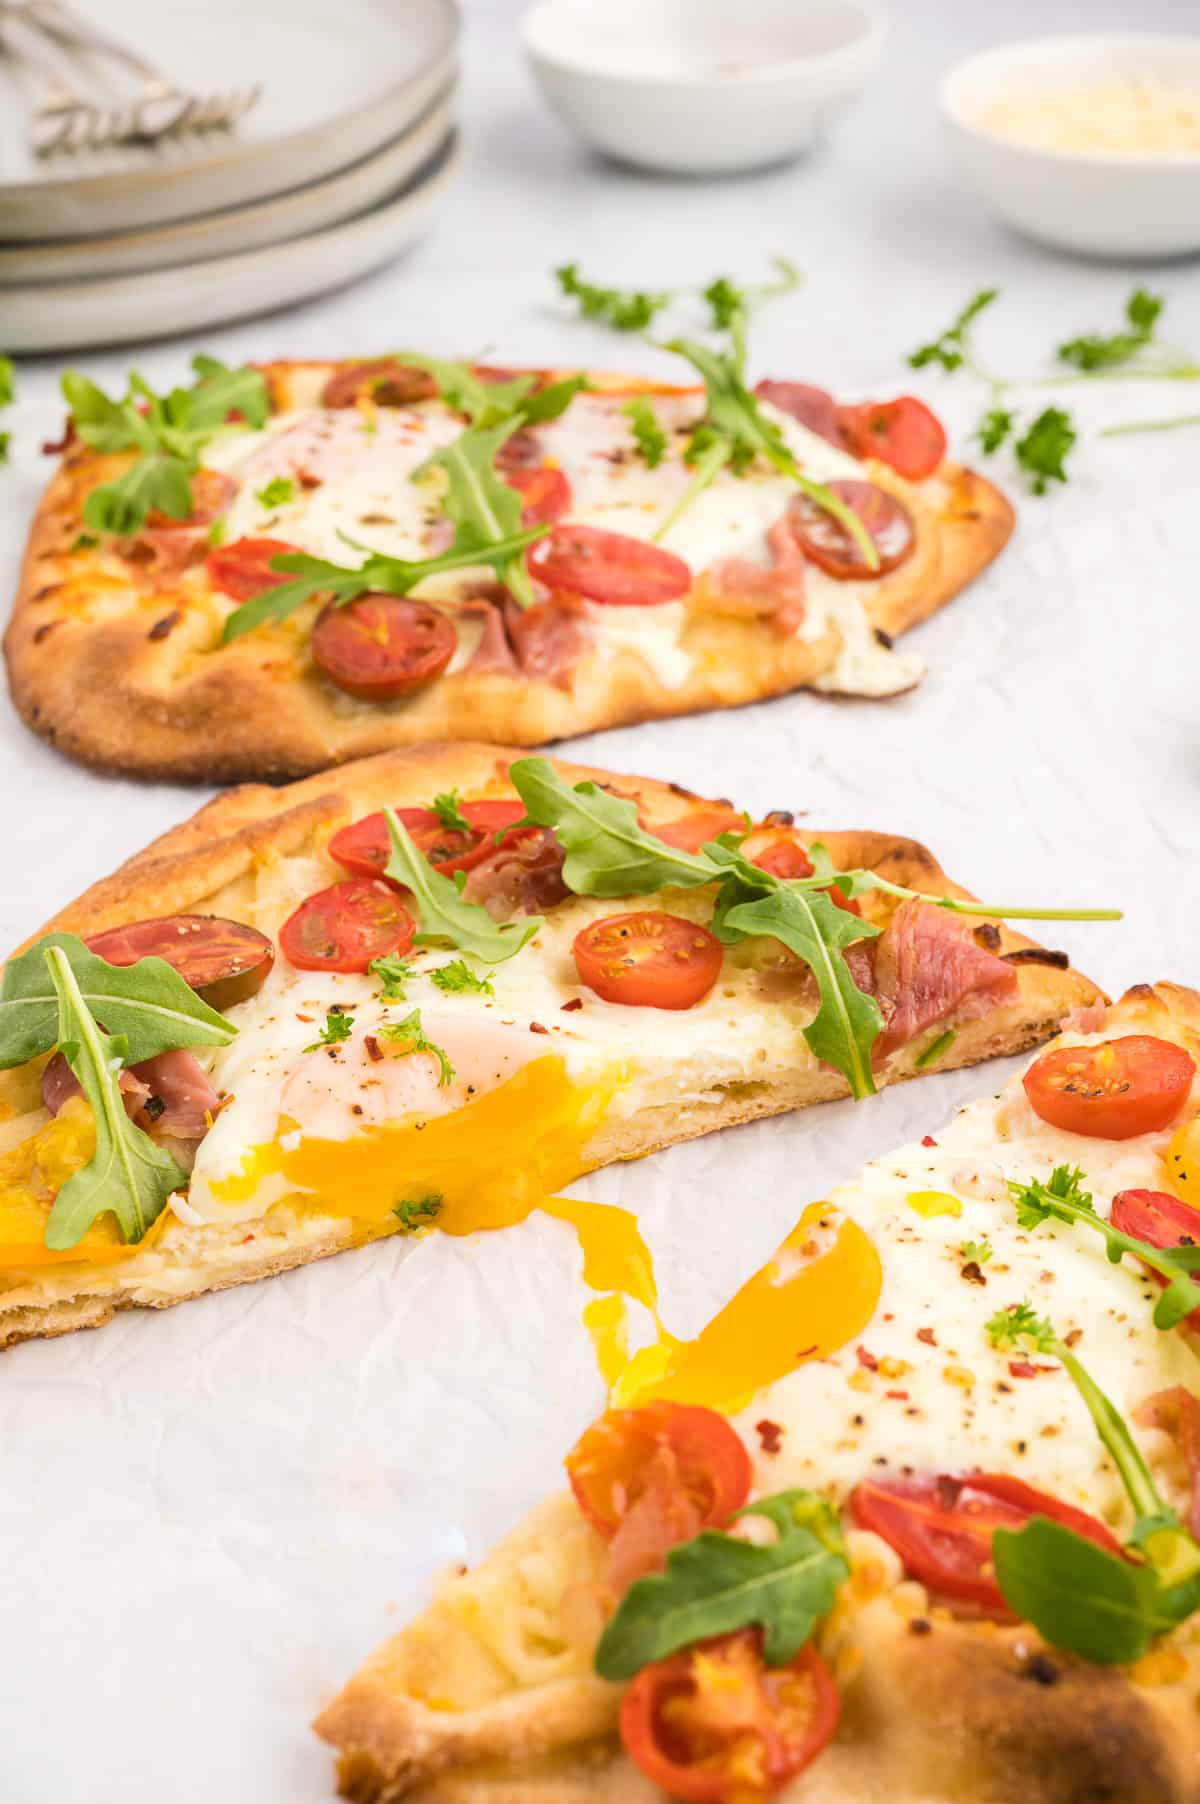 Breakfast pizza with tomatoes, arugula, egg, and bacon.